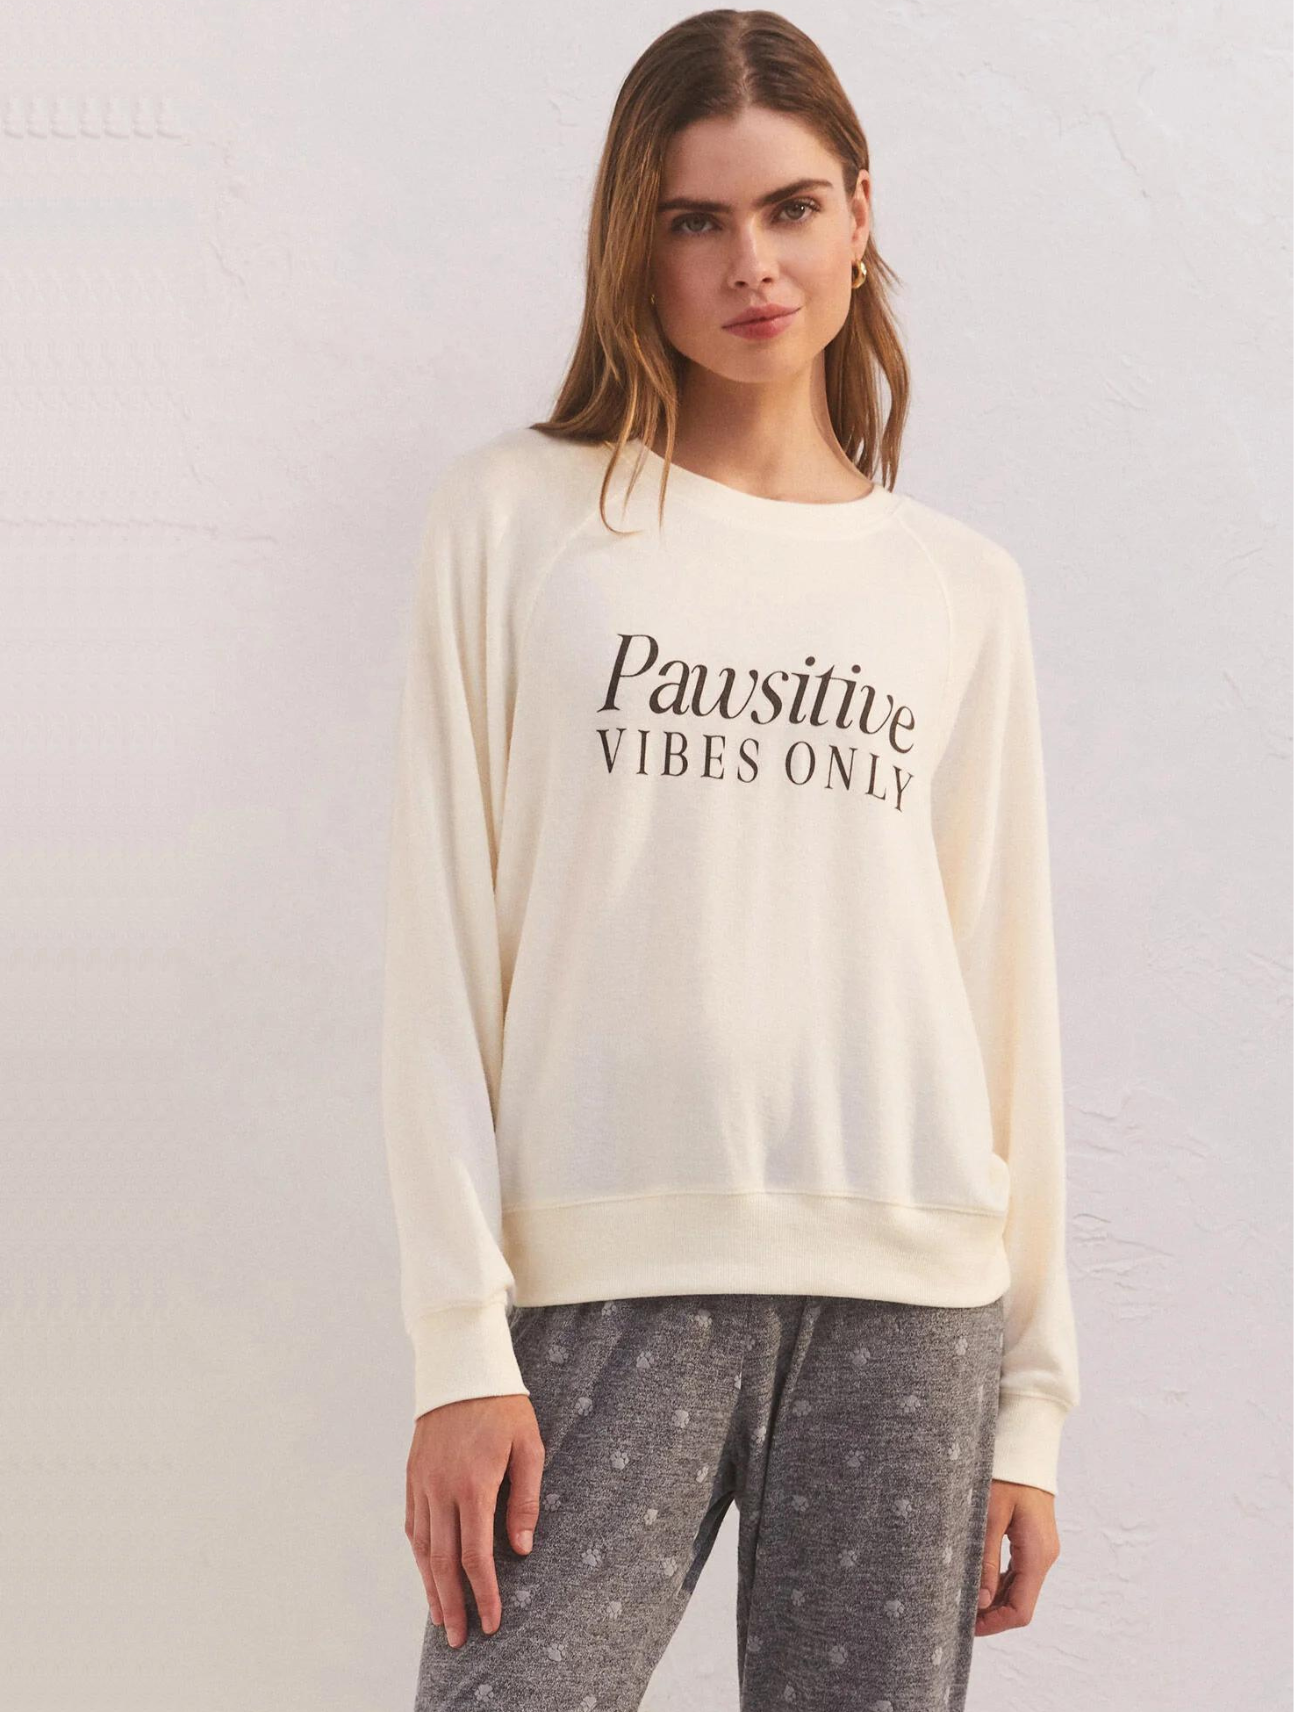 Cassie Pawsitive Long Sleeve Top